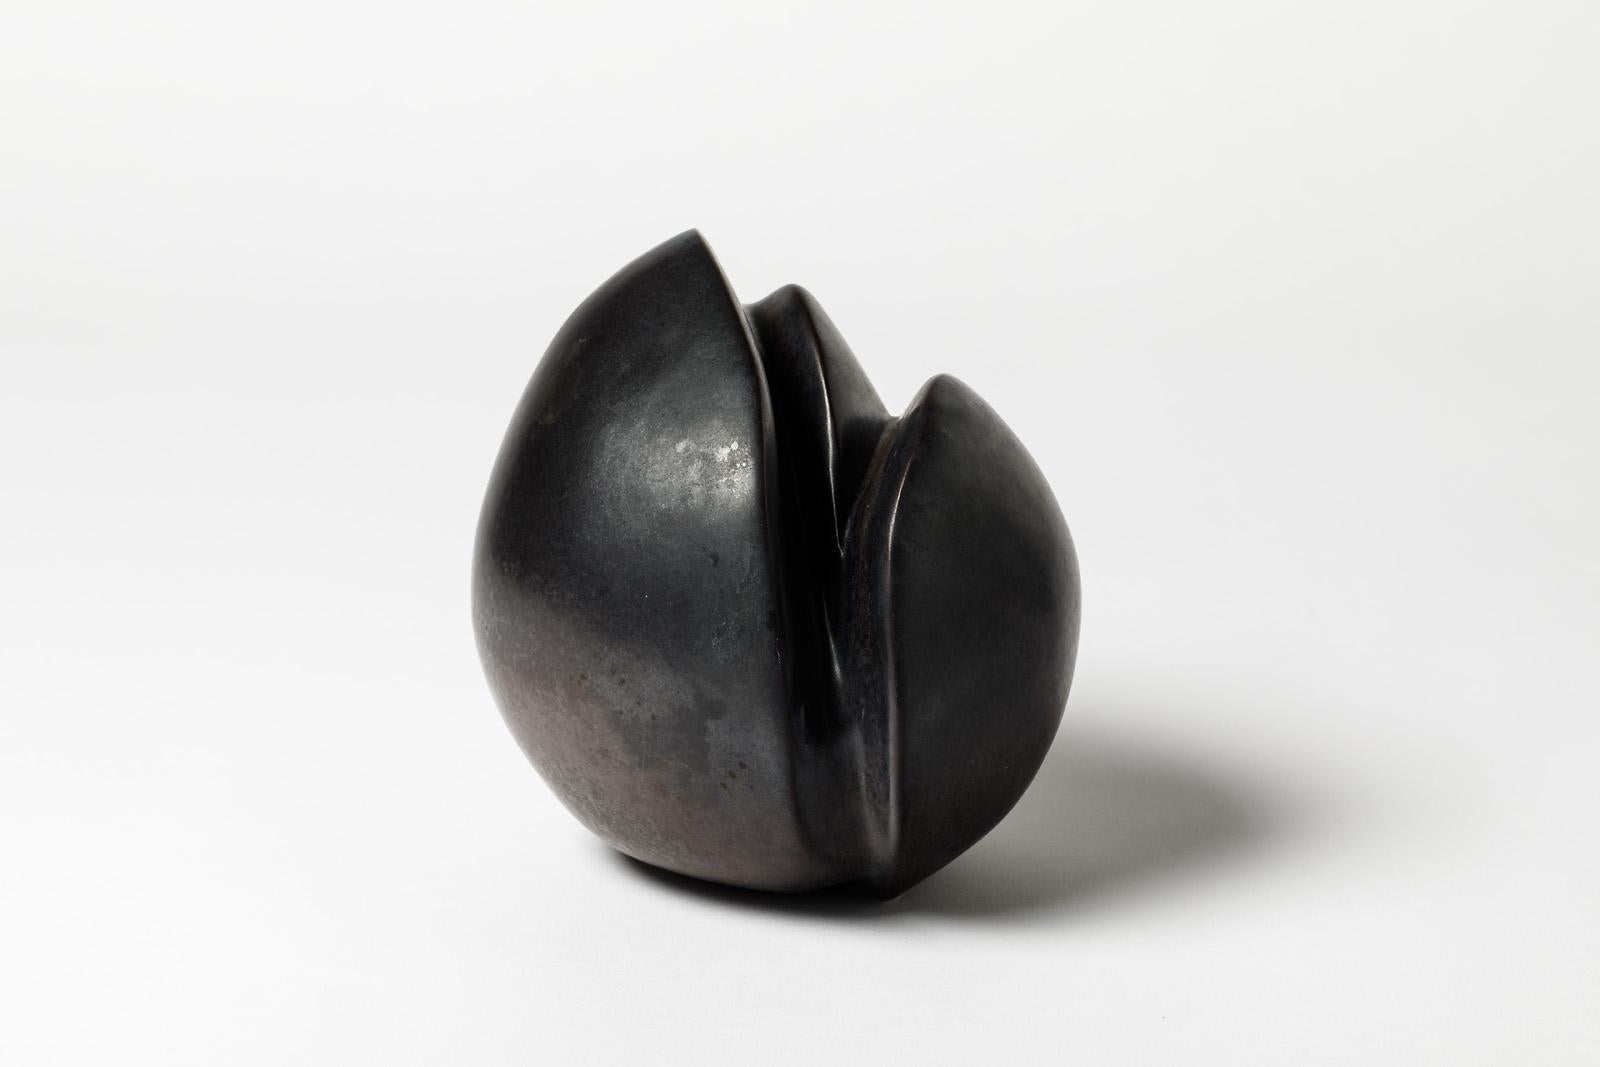 French Porcelain Sculpture with Black Glaze Decoration by Tim Orr, circa 1970